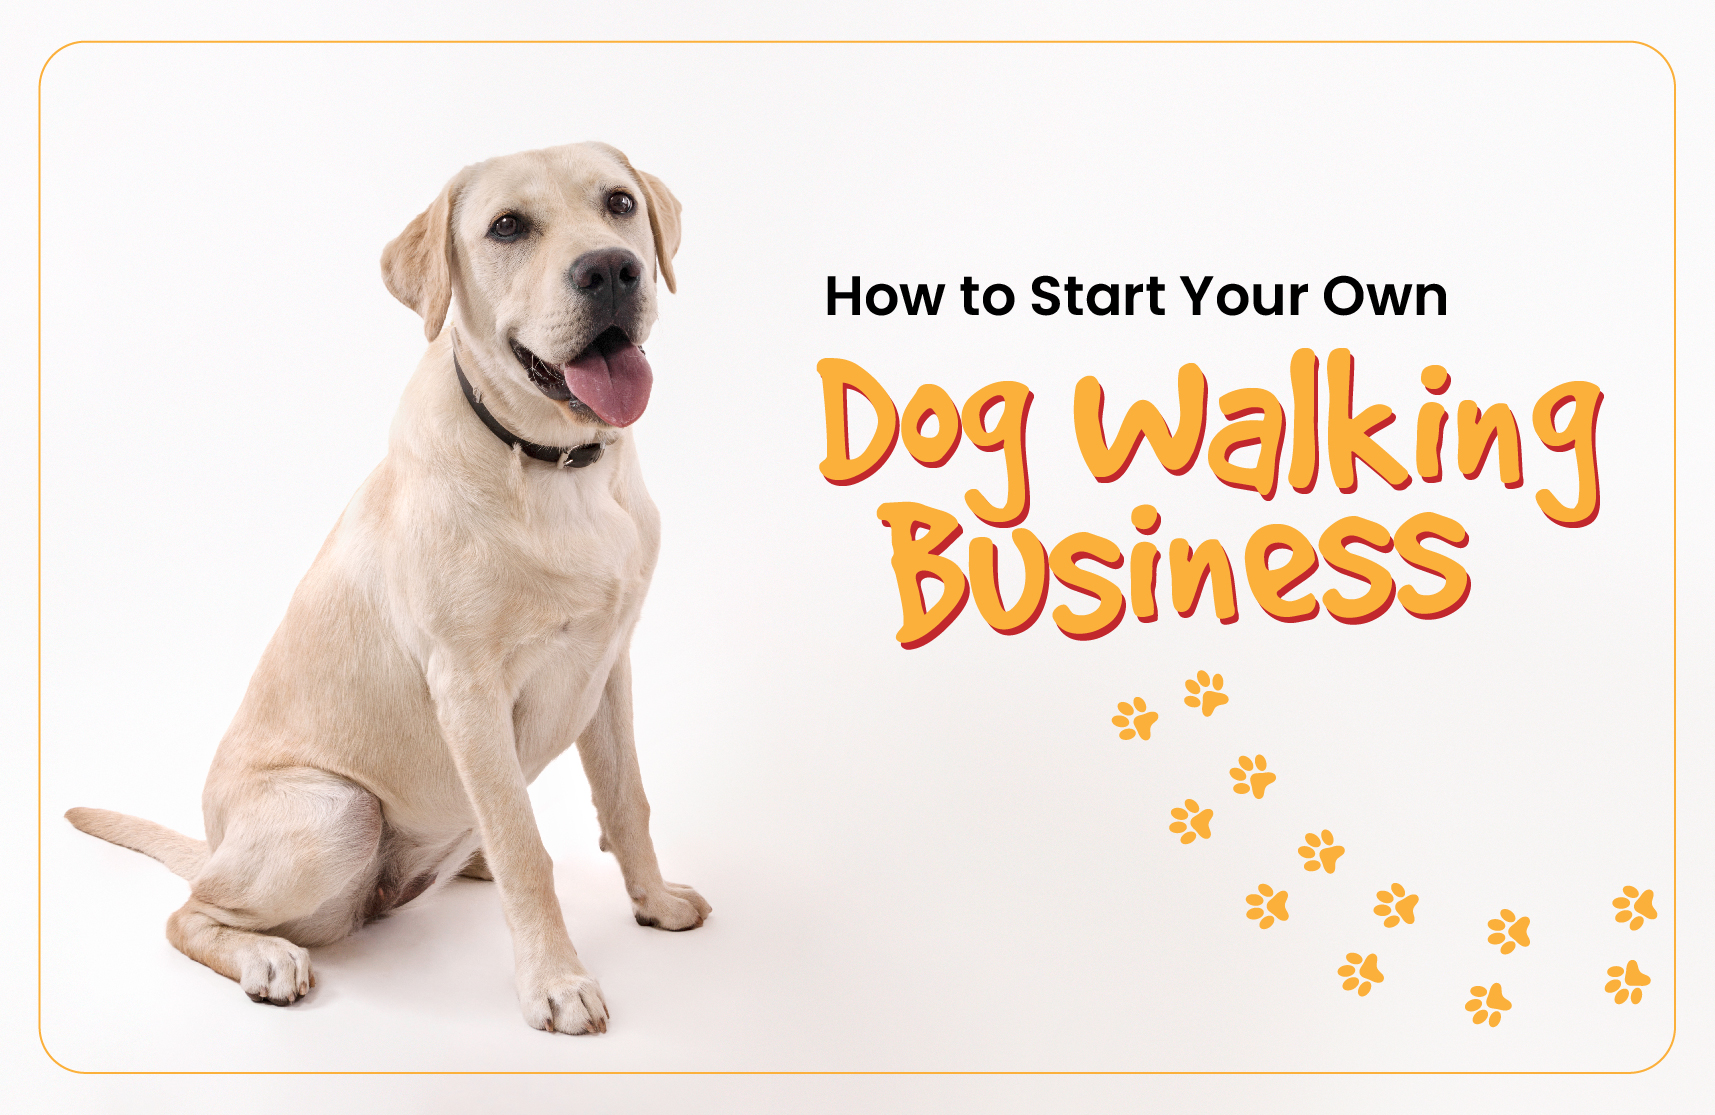 How to Start Your Own Dog Walking Business?